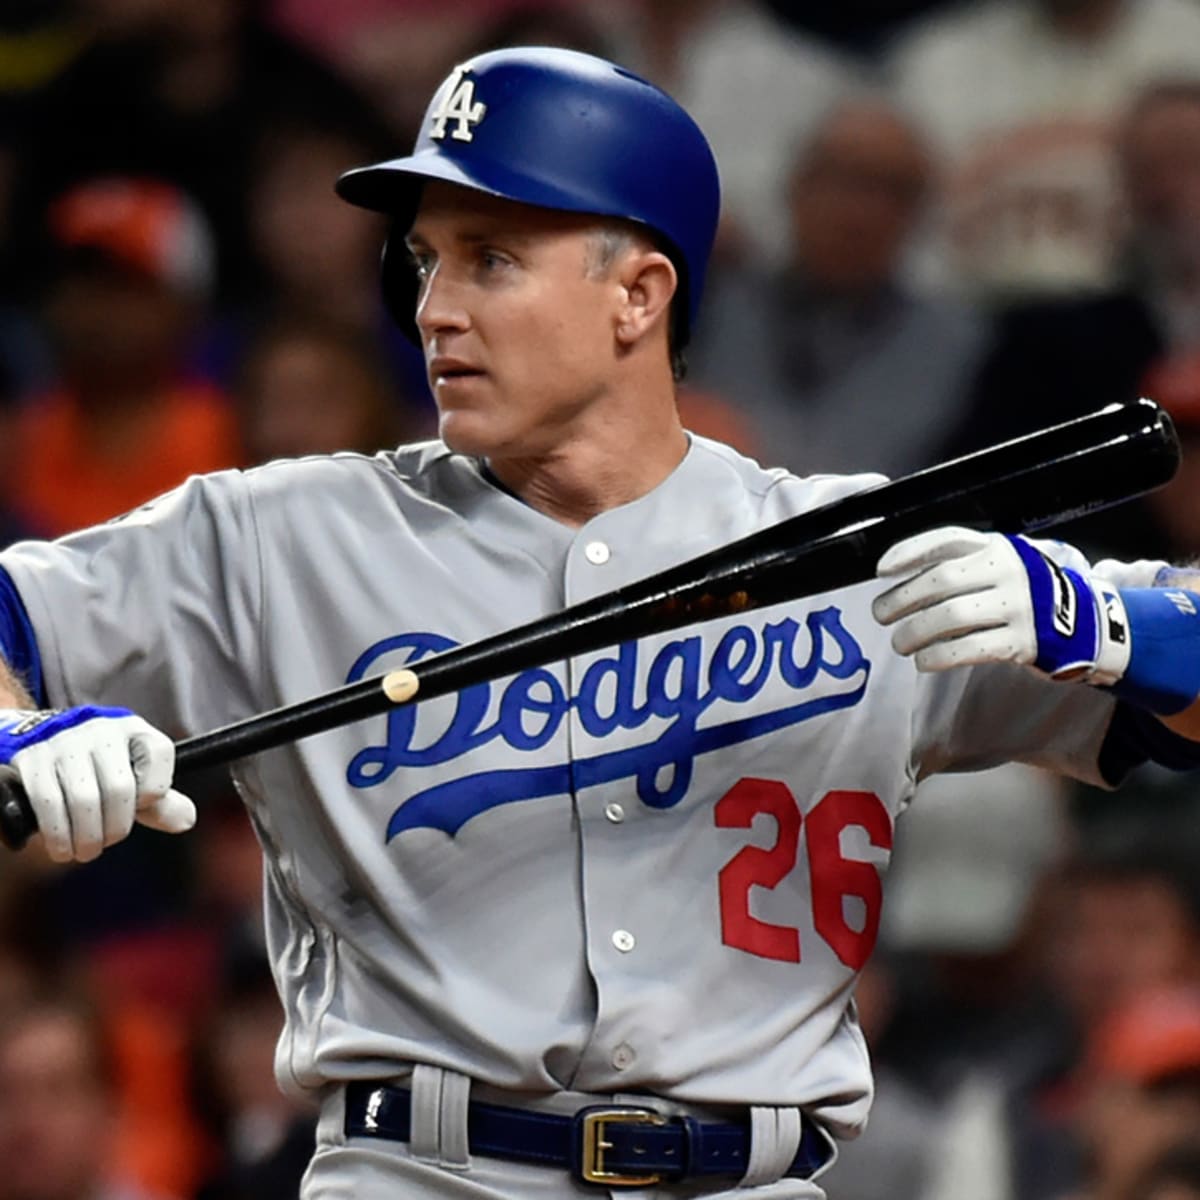 MLB Champion Chase Utley on Next Phase of His Career: 'Moving to